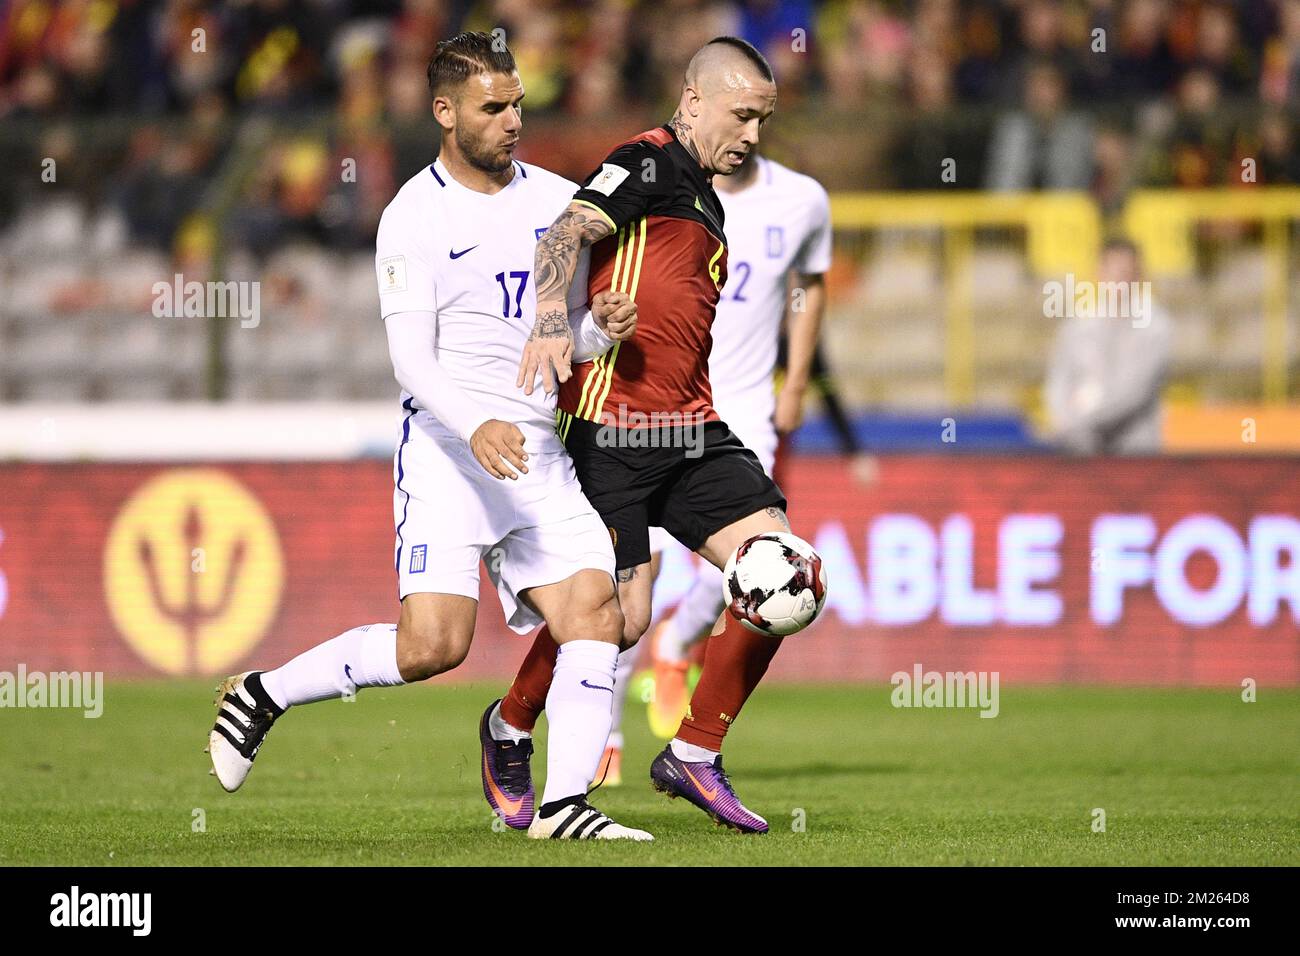 Greece's Panagiotis Tachtsidis and Belgium's Radja Nainggolan fight for the ball during a World Cup 2018 qualification game between Belgium's Red Devils and Greece, Saturday 25 March 2017, at the King Baudouin stadium in Brussels. BELGA PHOTO YORICK JANSENS Stock Photo